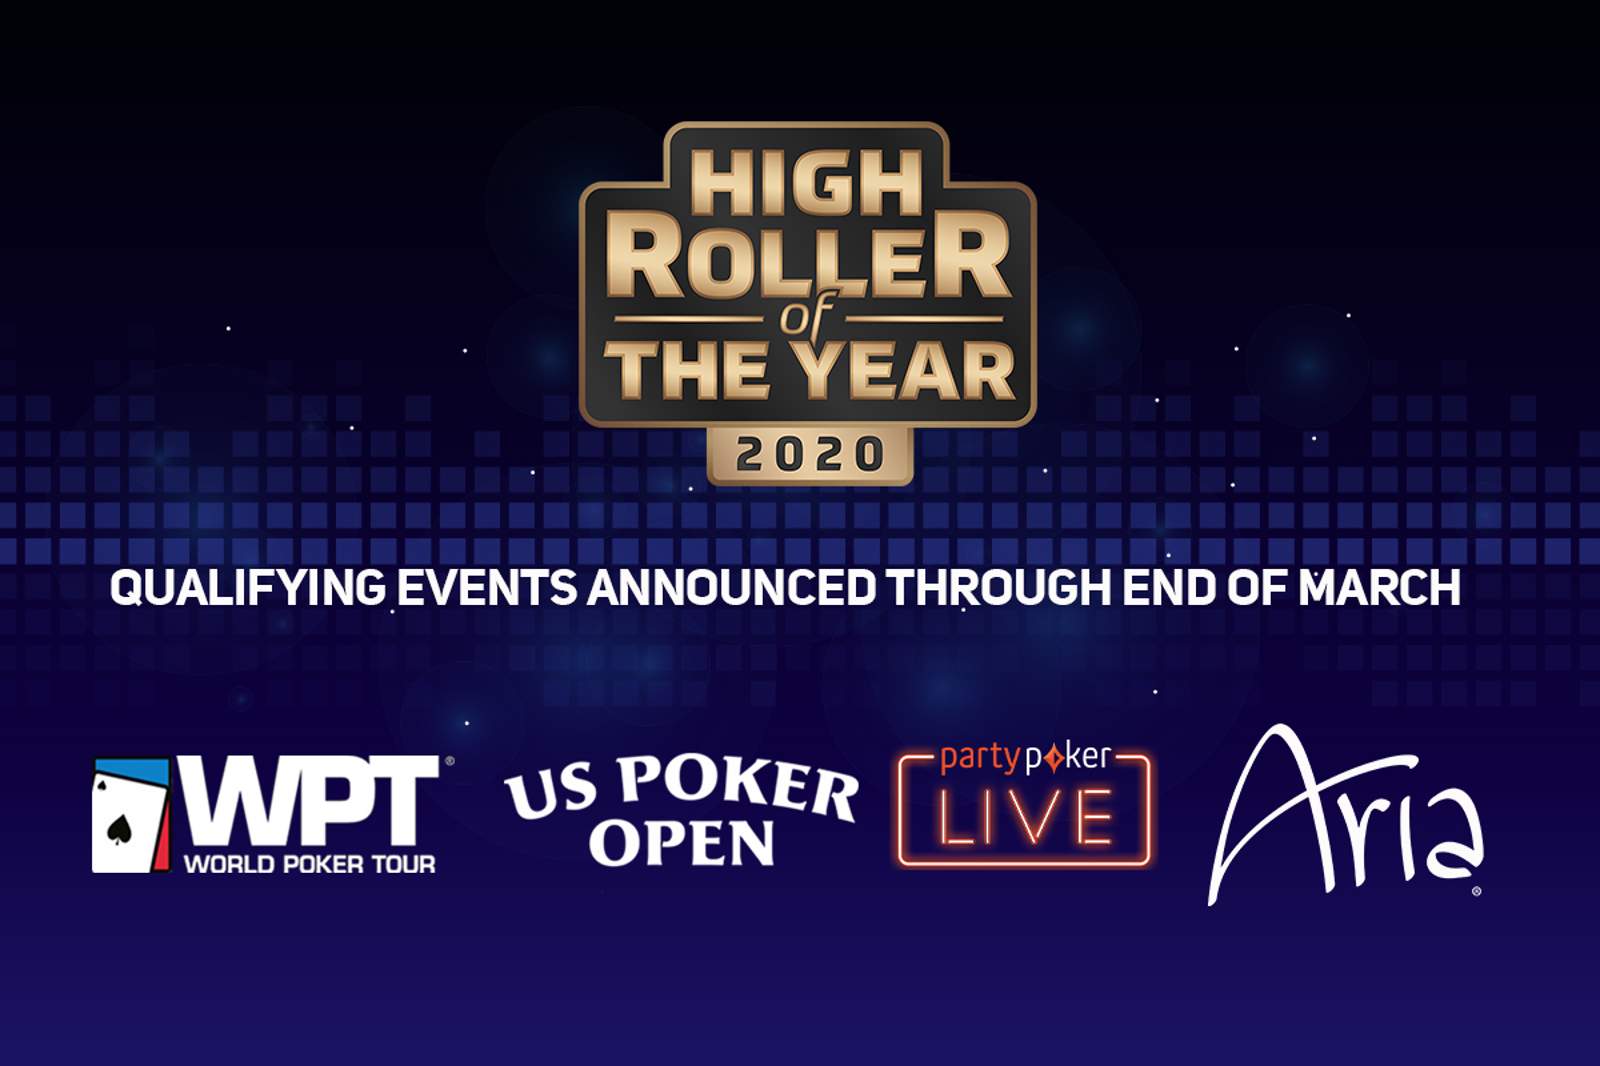 High Roller of the Year Schedule Announced Through March